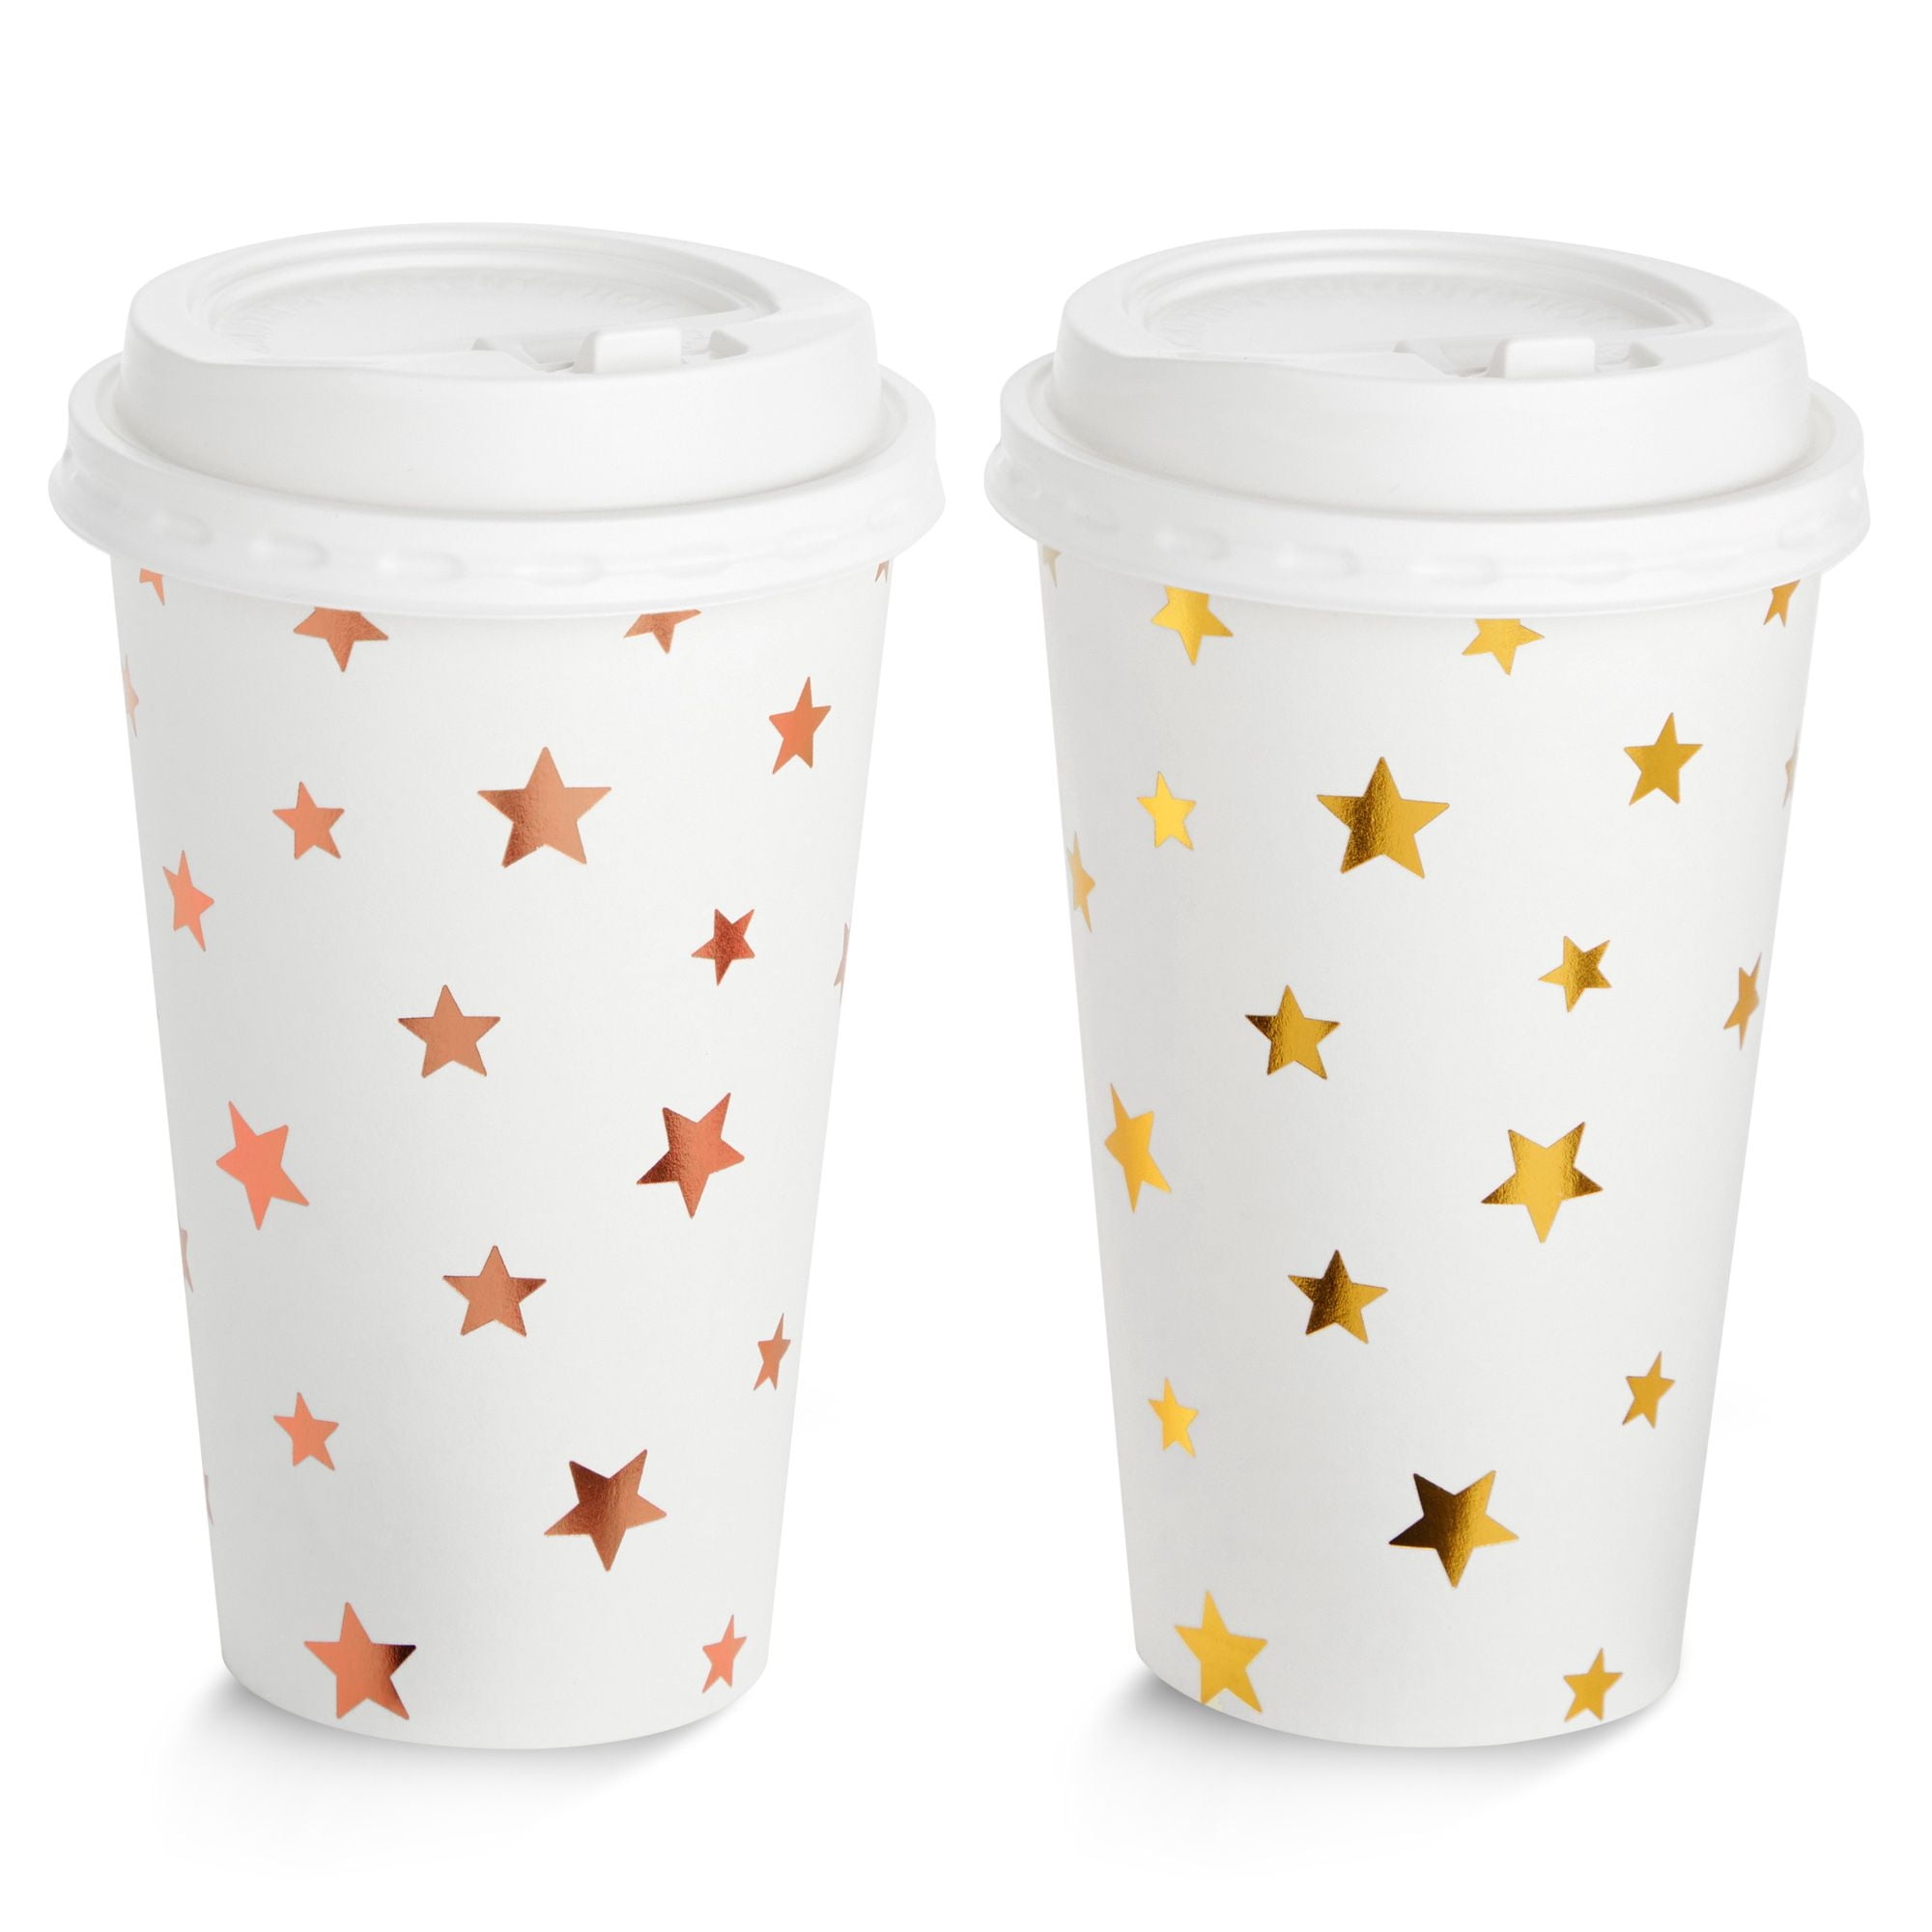 Promotional Insulated Paper Cups (16 Oz., White), Drinkware & Barware